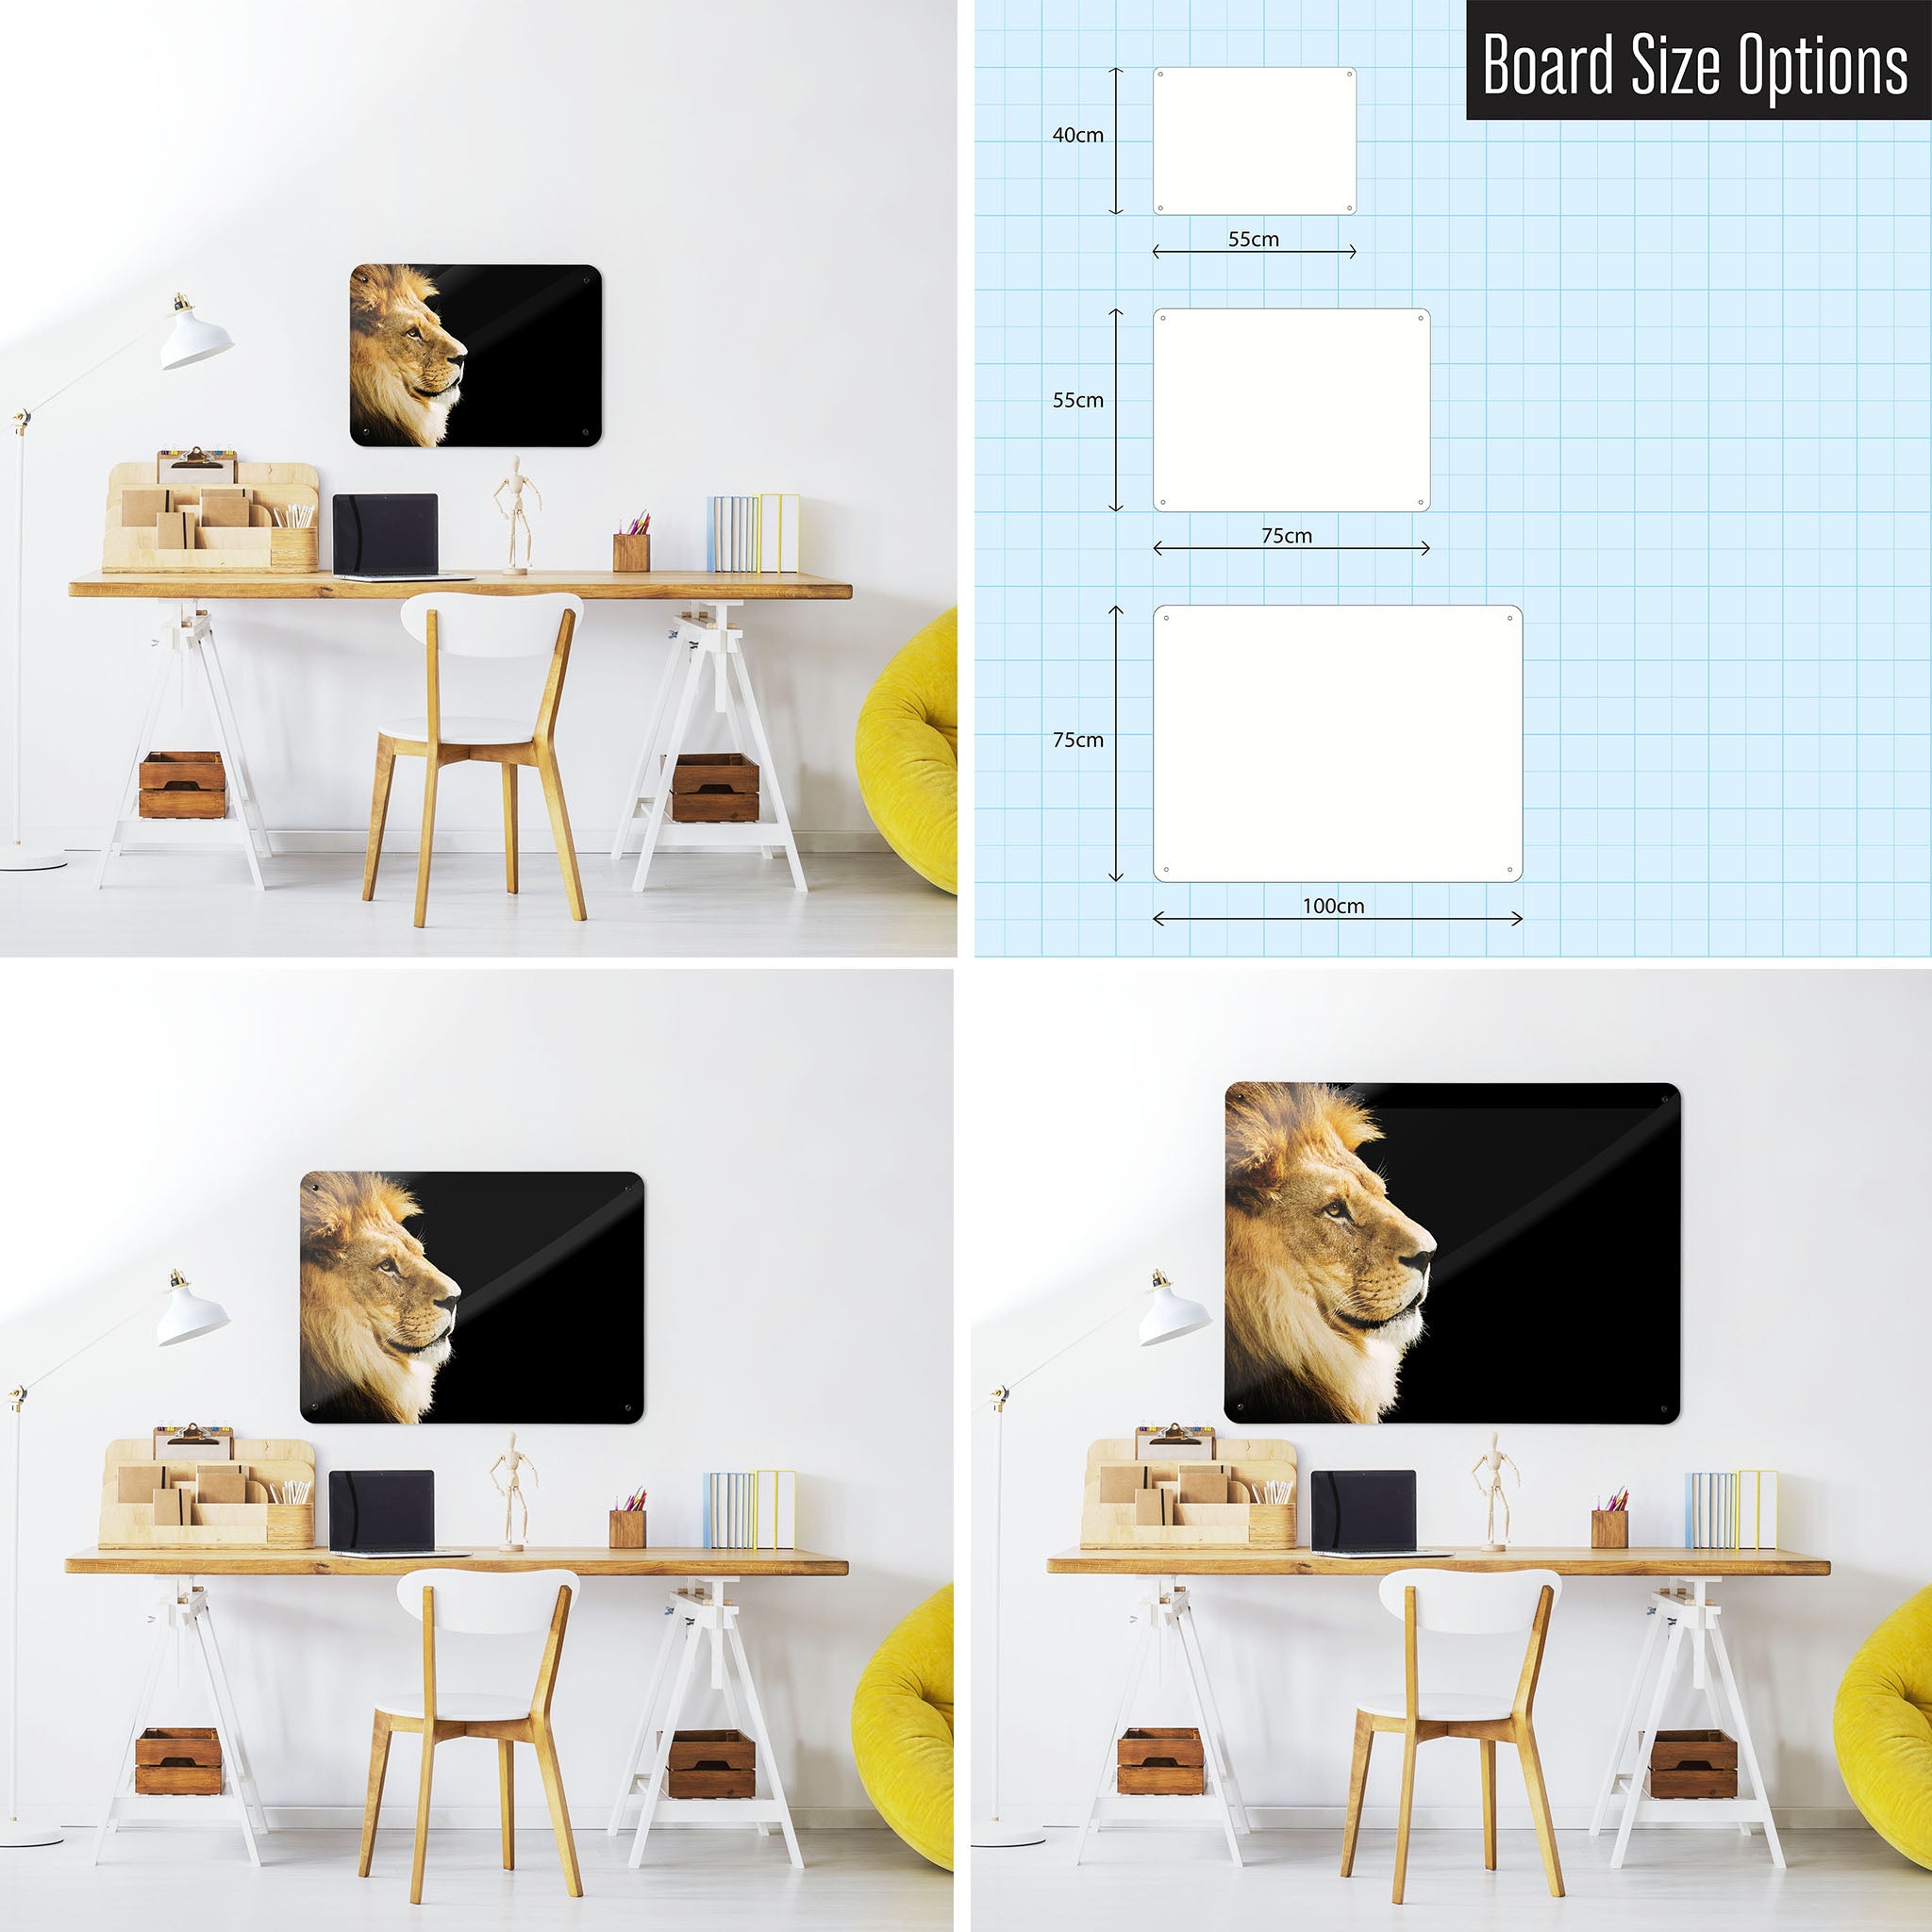 Three photographs of a workspace interior and a diagram to show size comparisons of a jelly beans lion photographic magnetic notice board